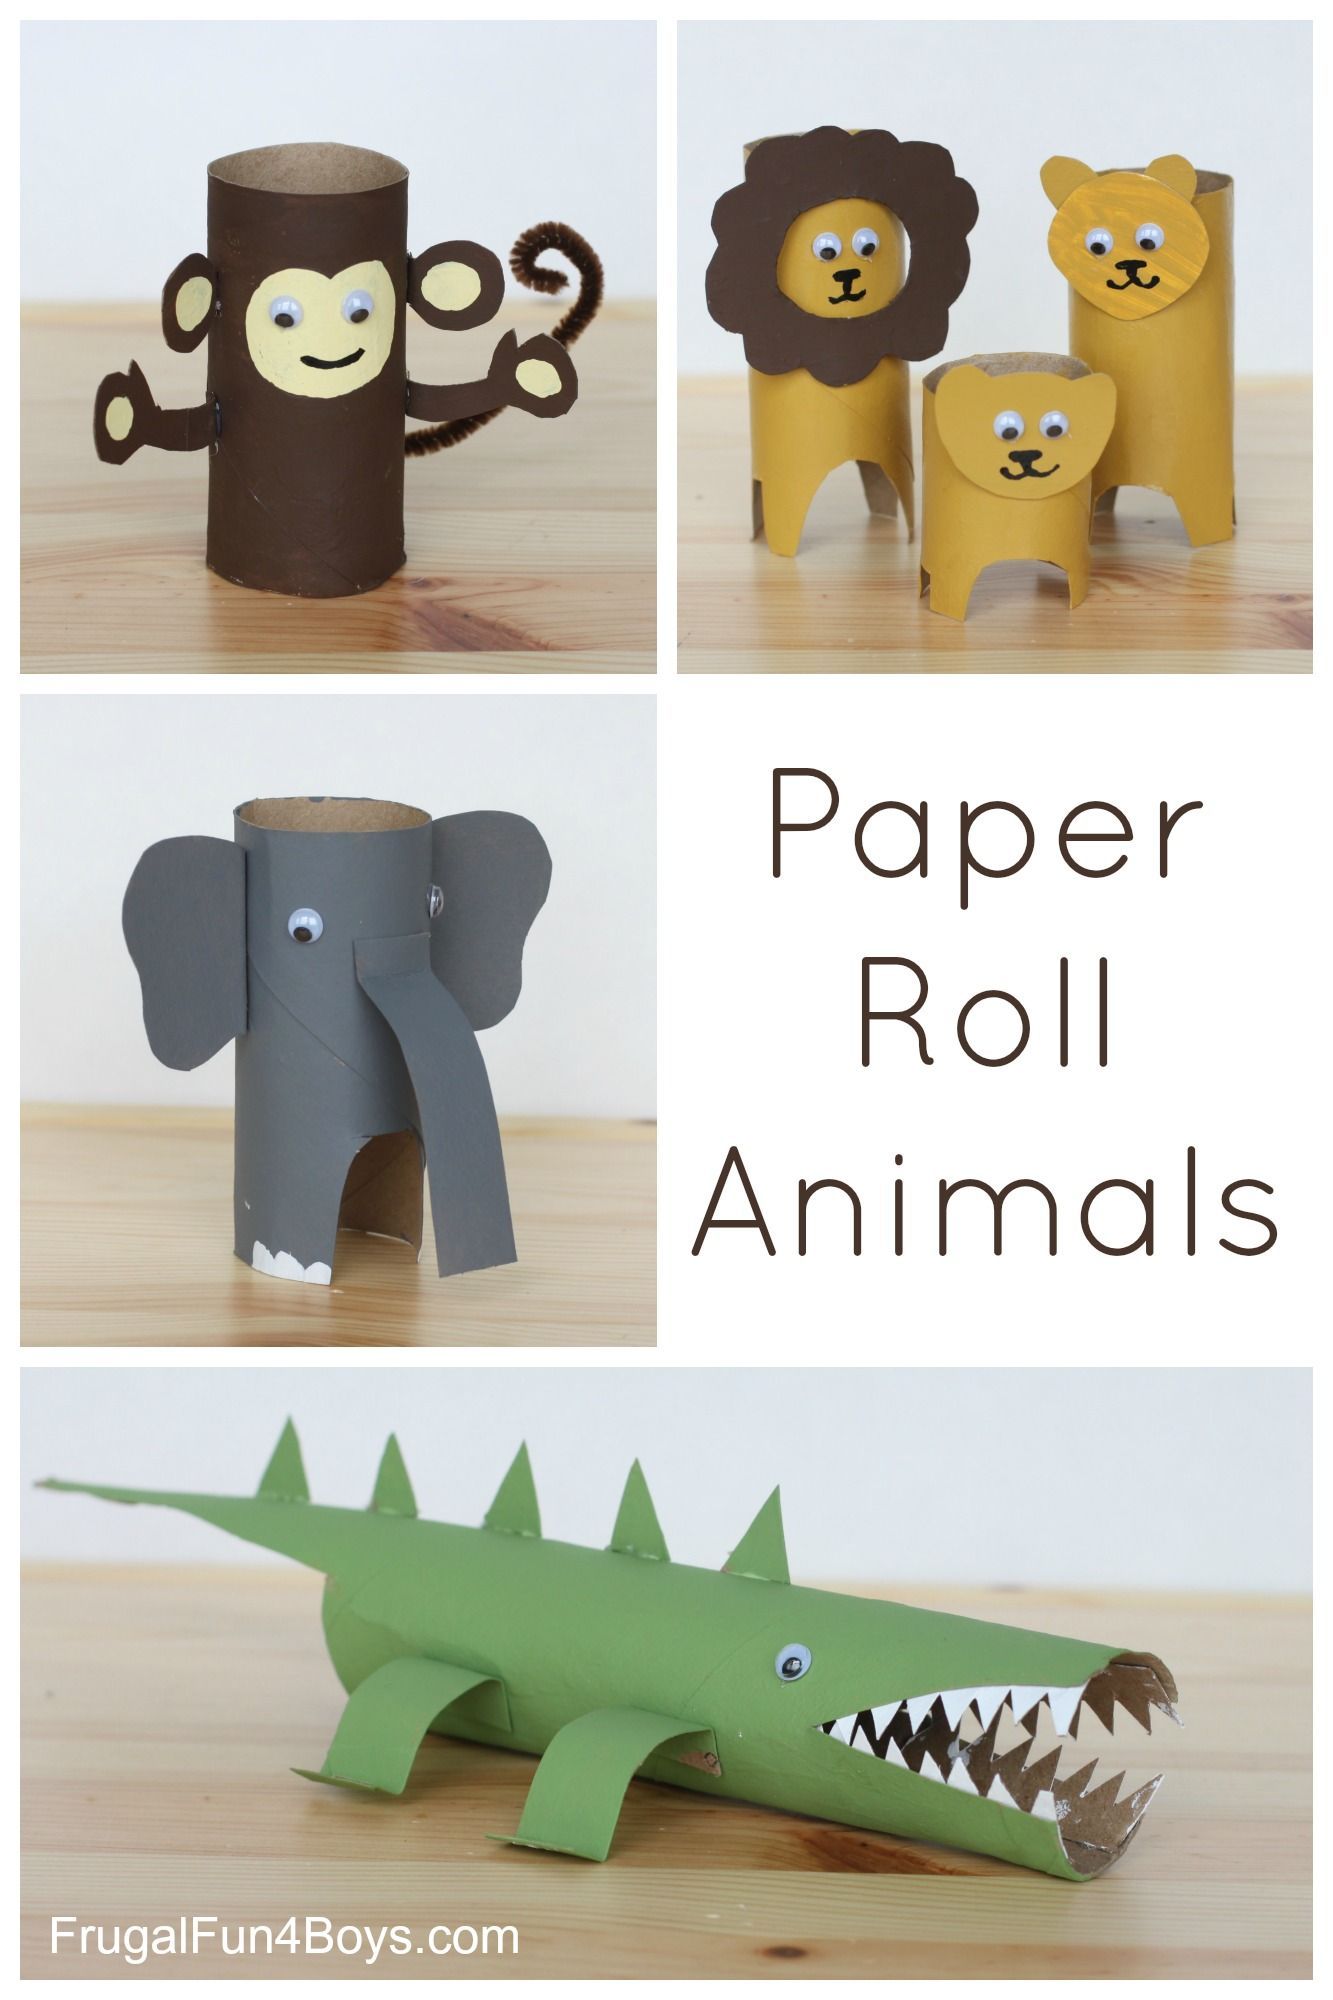 Simple toilet paper/paper towel roll animals. Adorable kids craft!